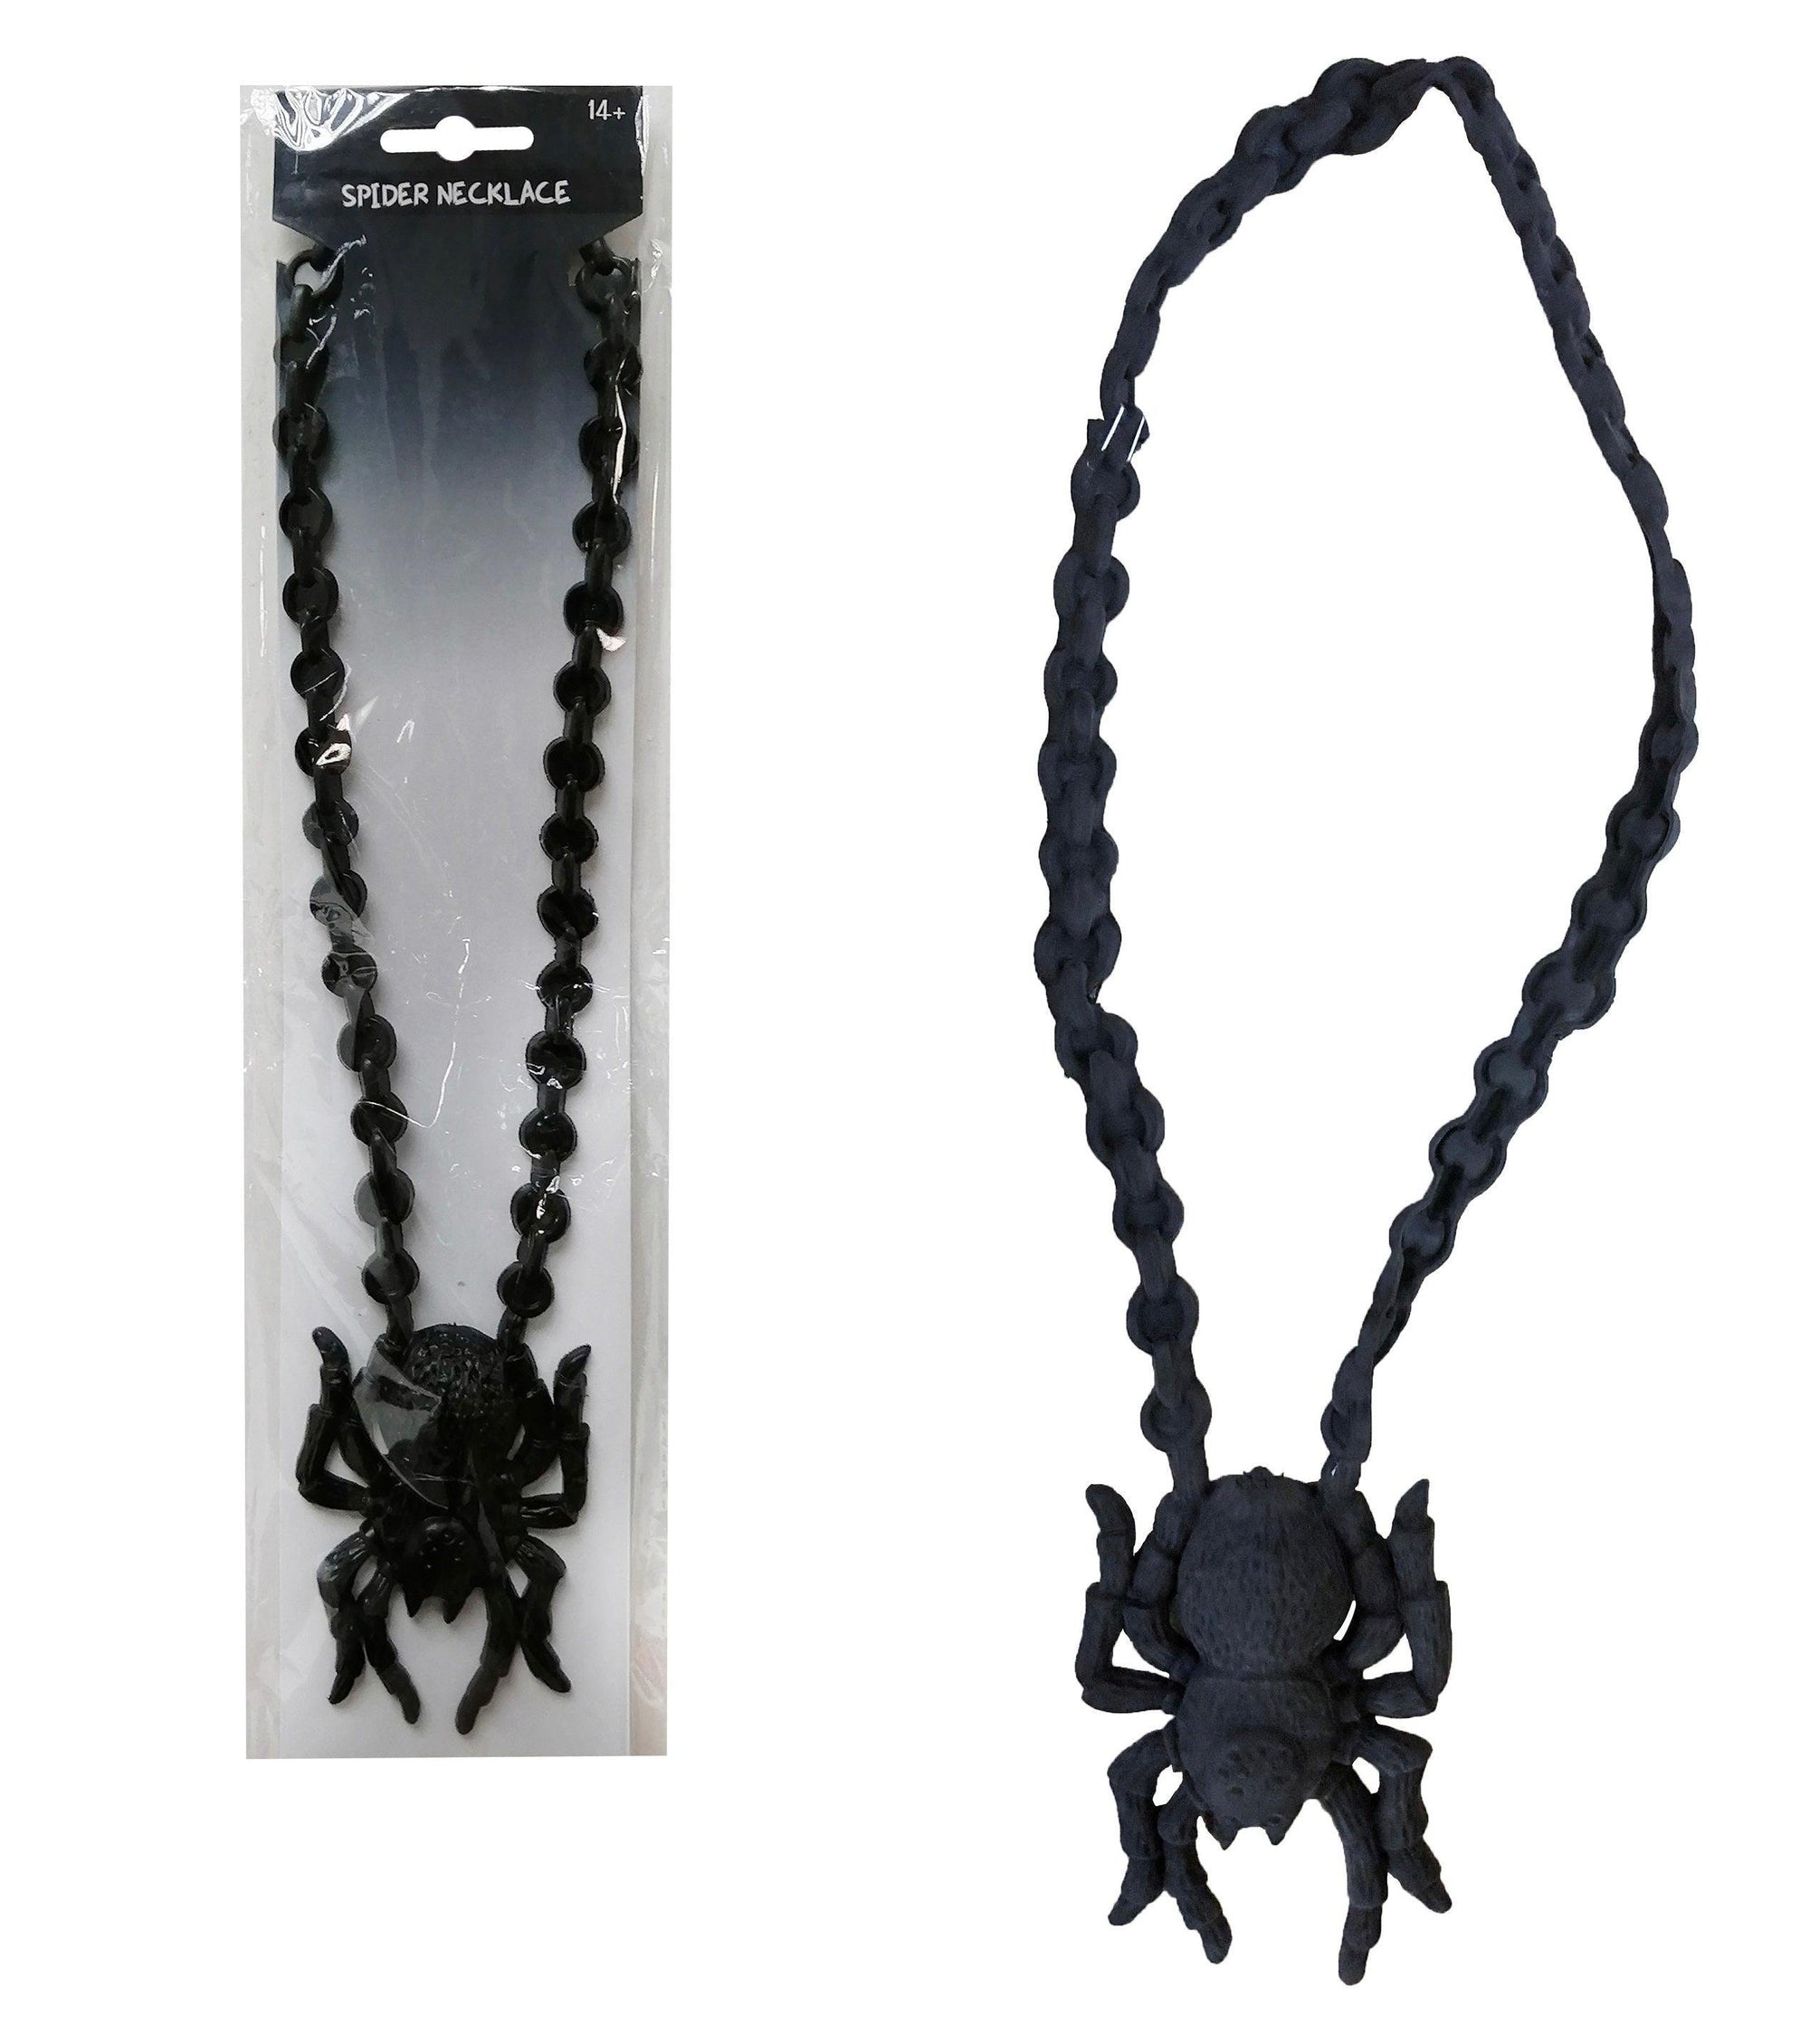 Boo! Halloween Black Widow Spider Necklace | Ages 14+ - Choice Stores